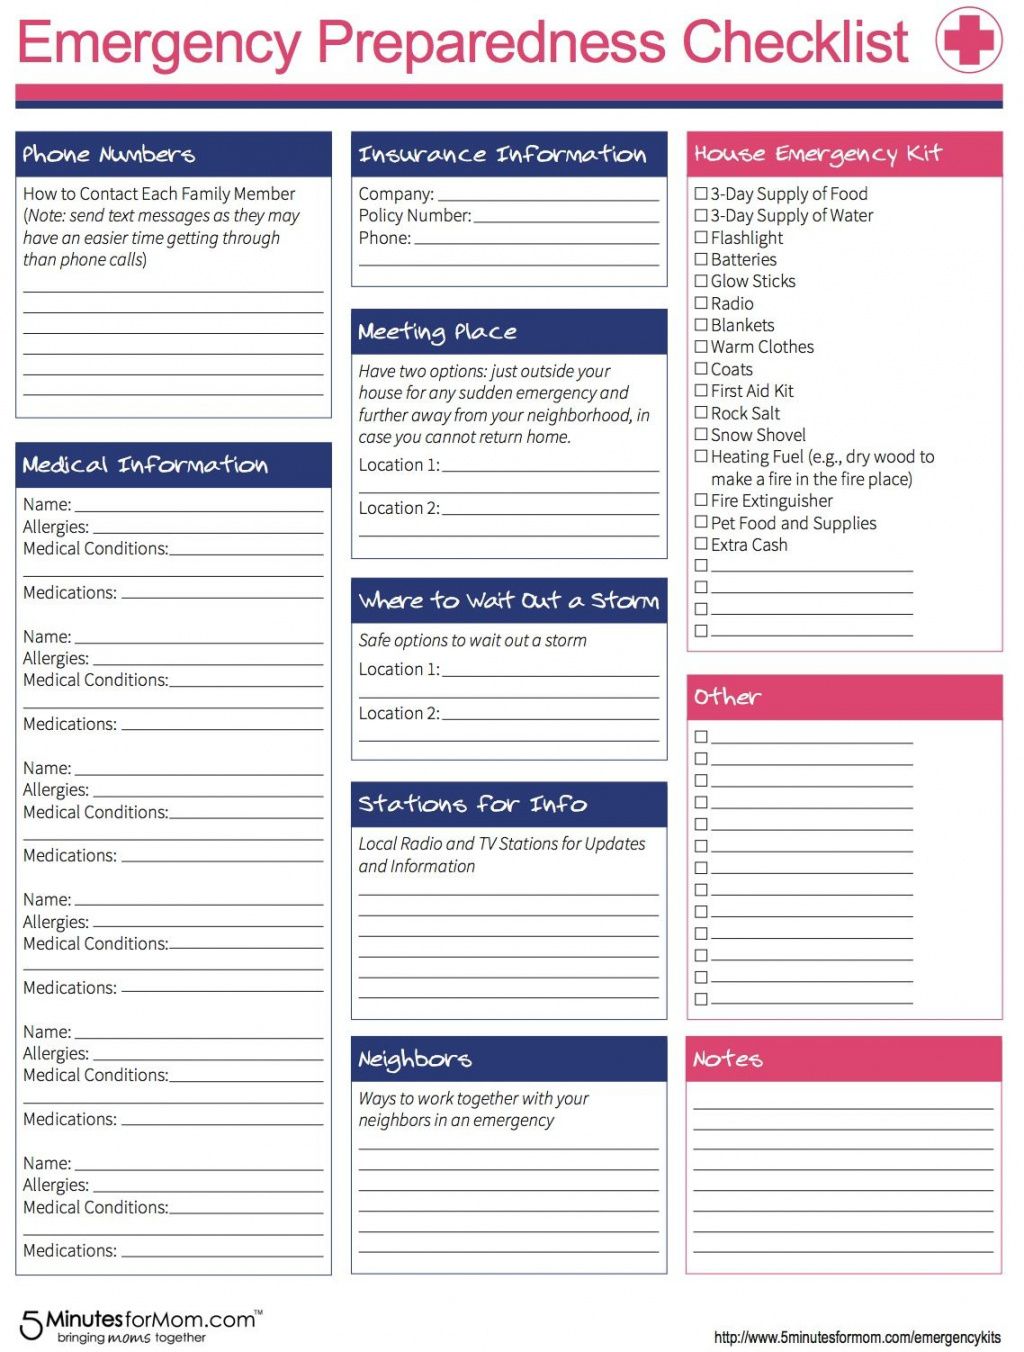 printable how to prepare for severe winter weather lsss emergencykits crisis management checklist template pdf